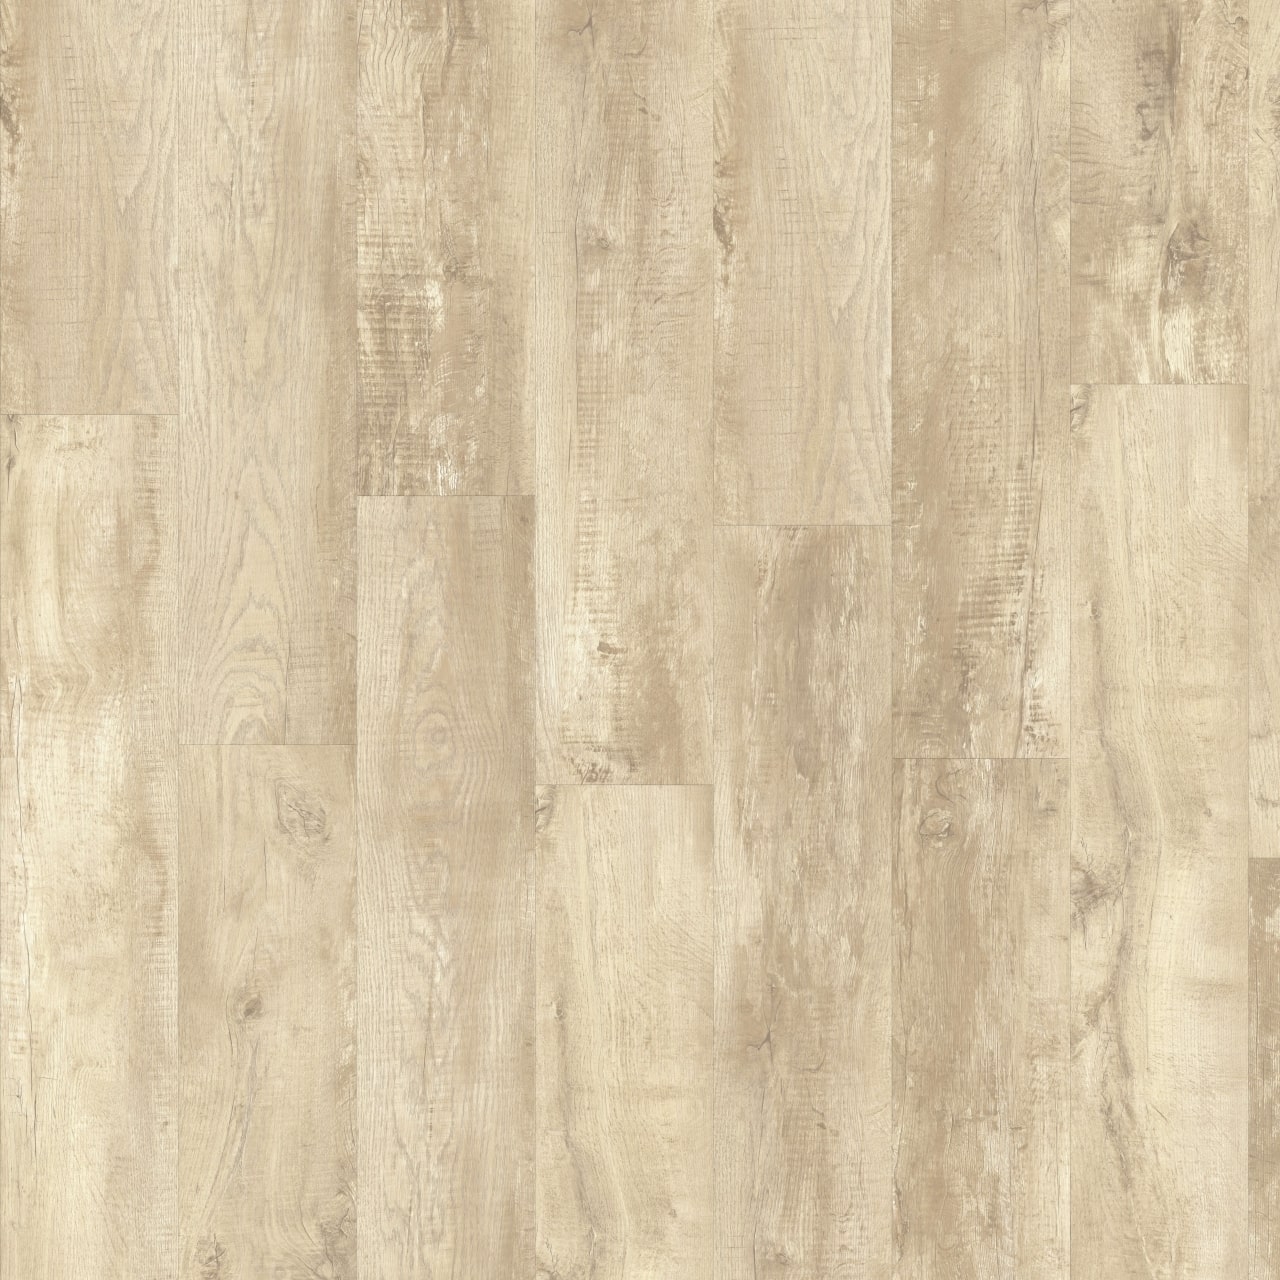 LayRed Country Oak 54265